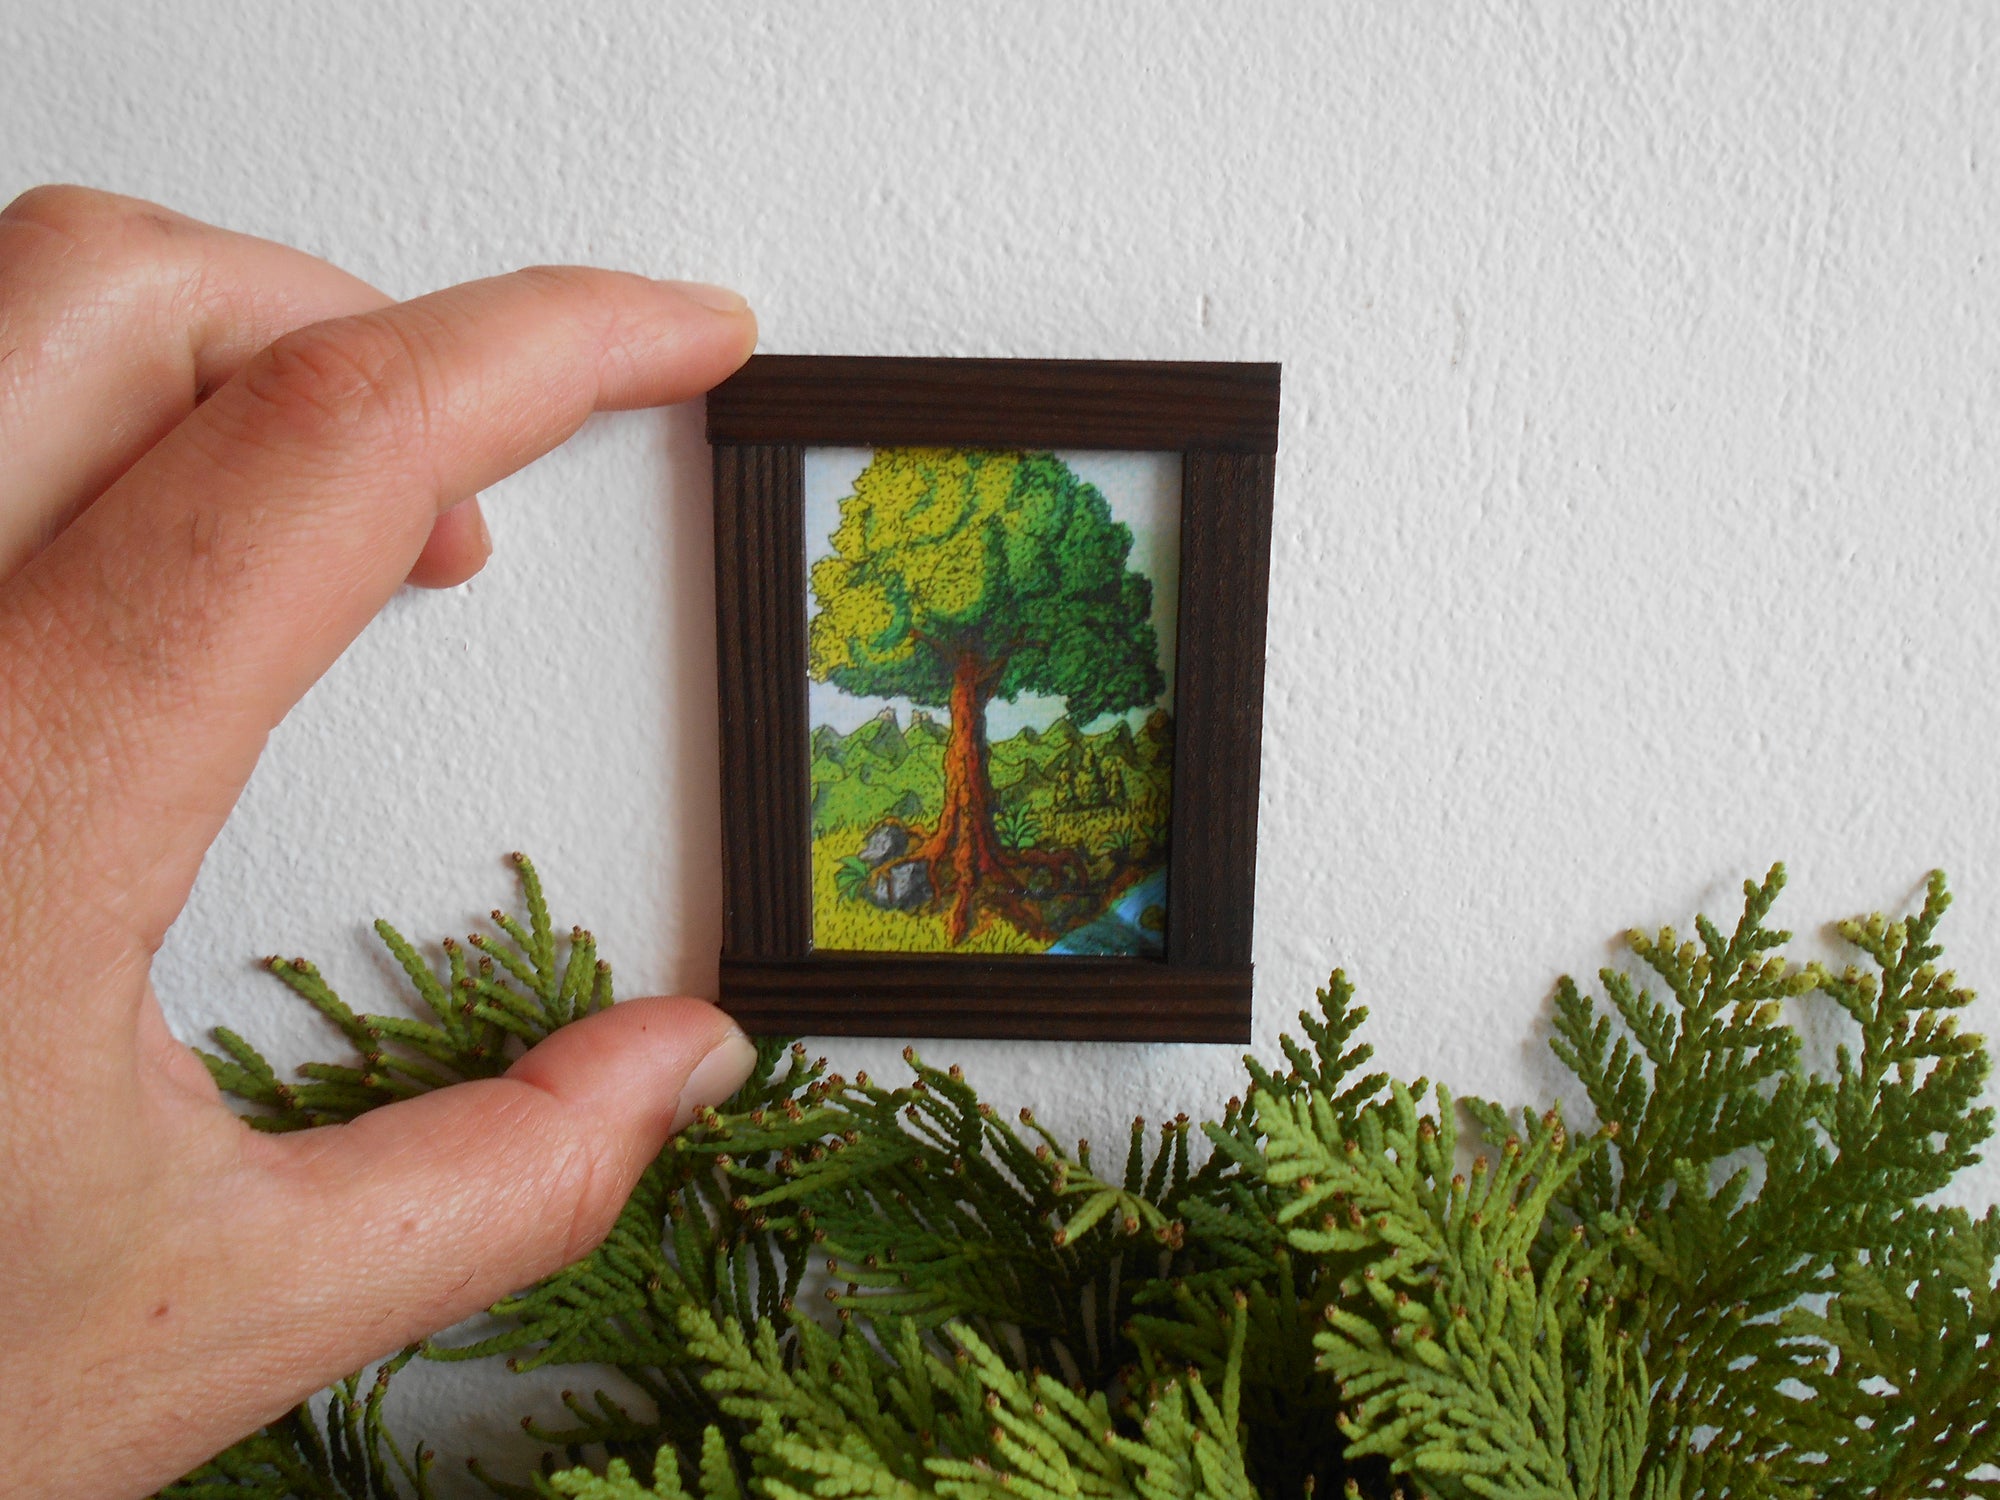 Miniature art framed with real pinewood- mini 'painting' artwork for dollhouse or for miniature collectors- handmade miniature dollhouse accessory